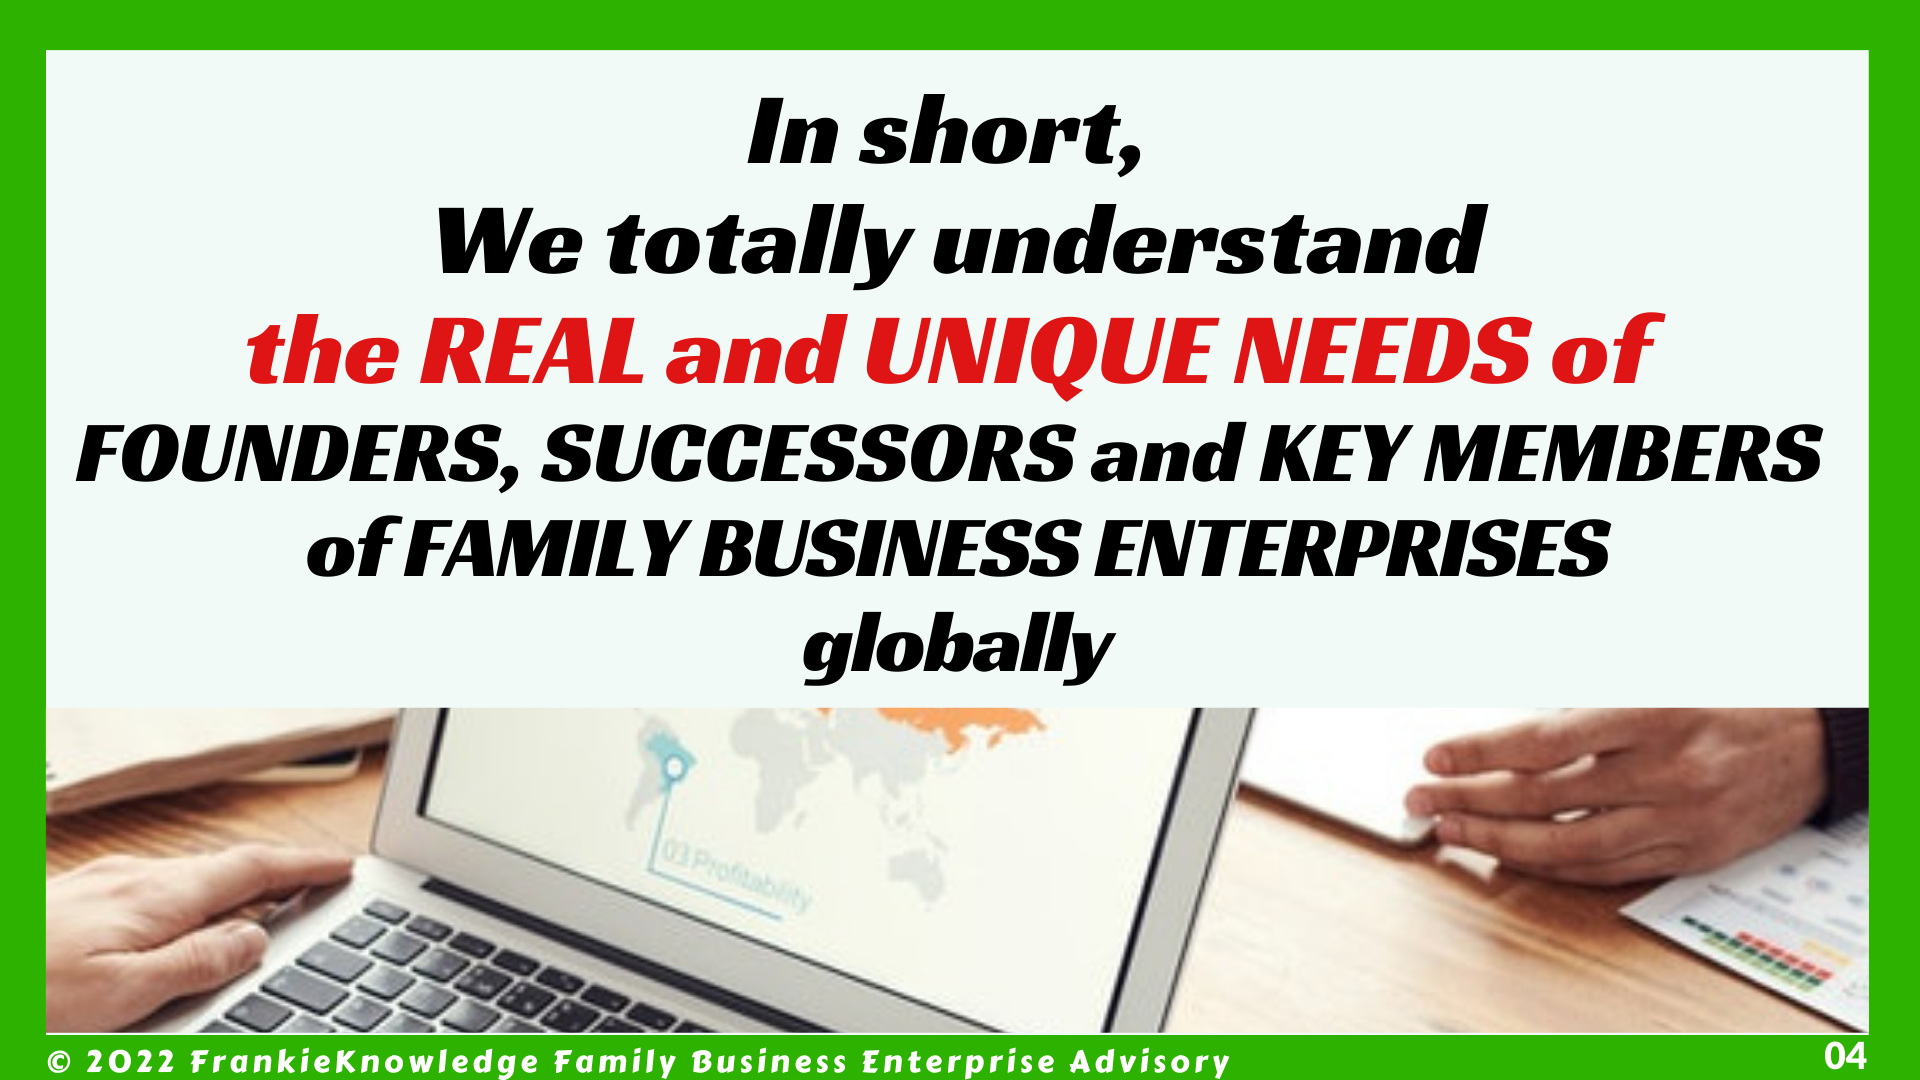 FrankieKnowledge totally understands the REAL and UNIQUE NEEDS of  FOUNDERS, SUCCESSORS and KEY MEMBERS, Family Business Enterprises  globally 